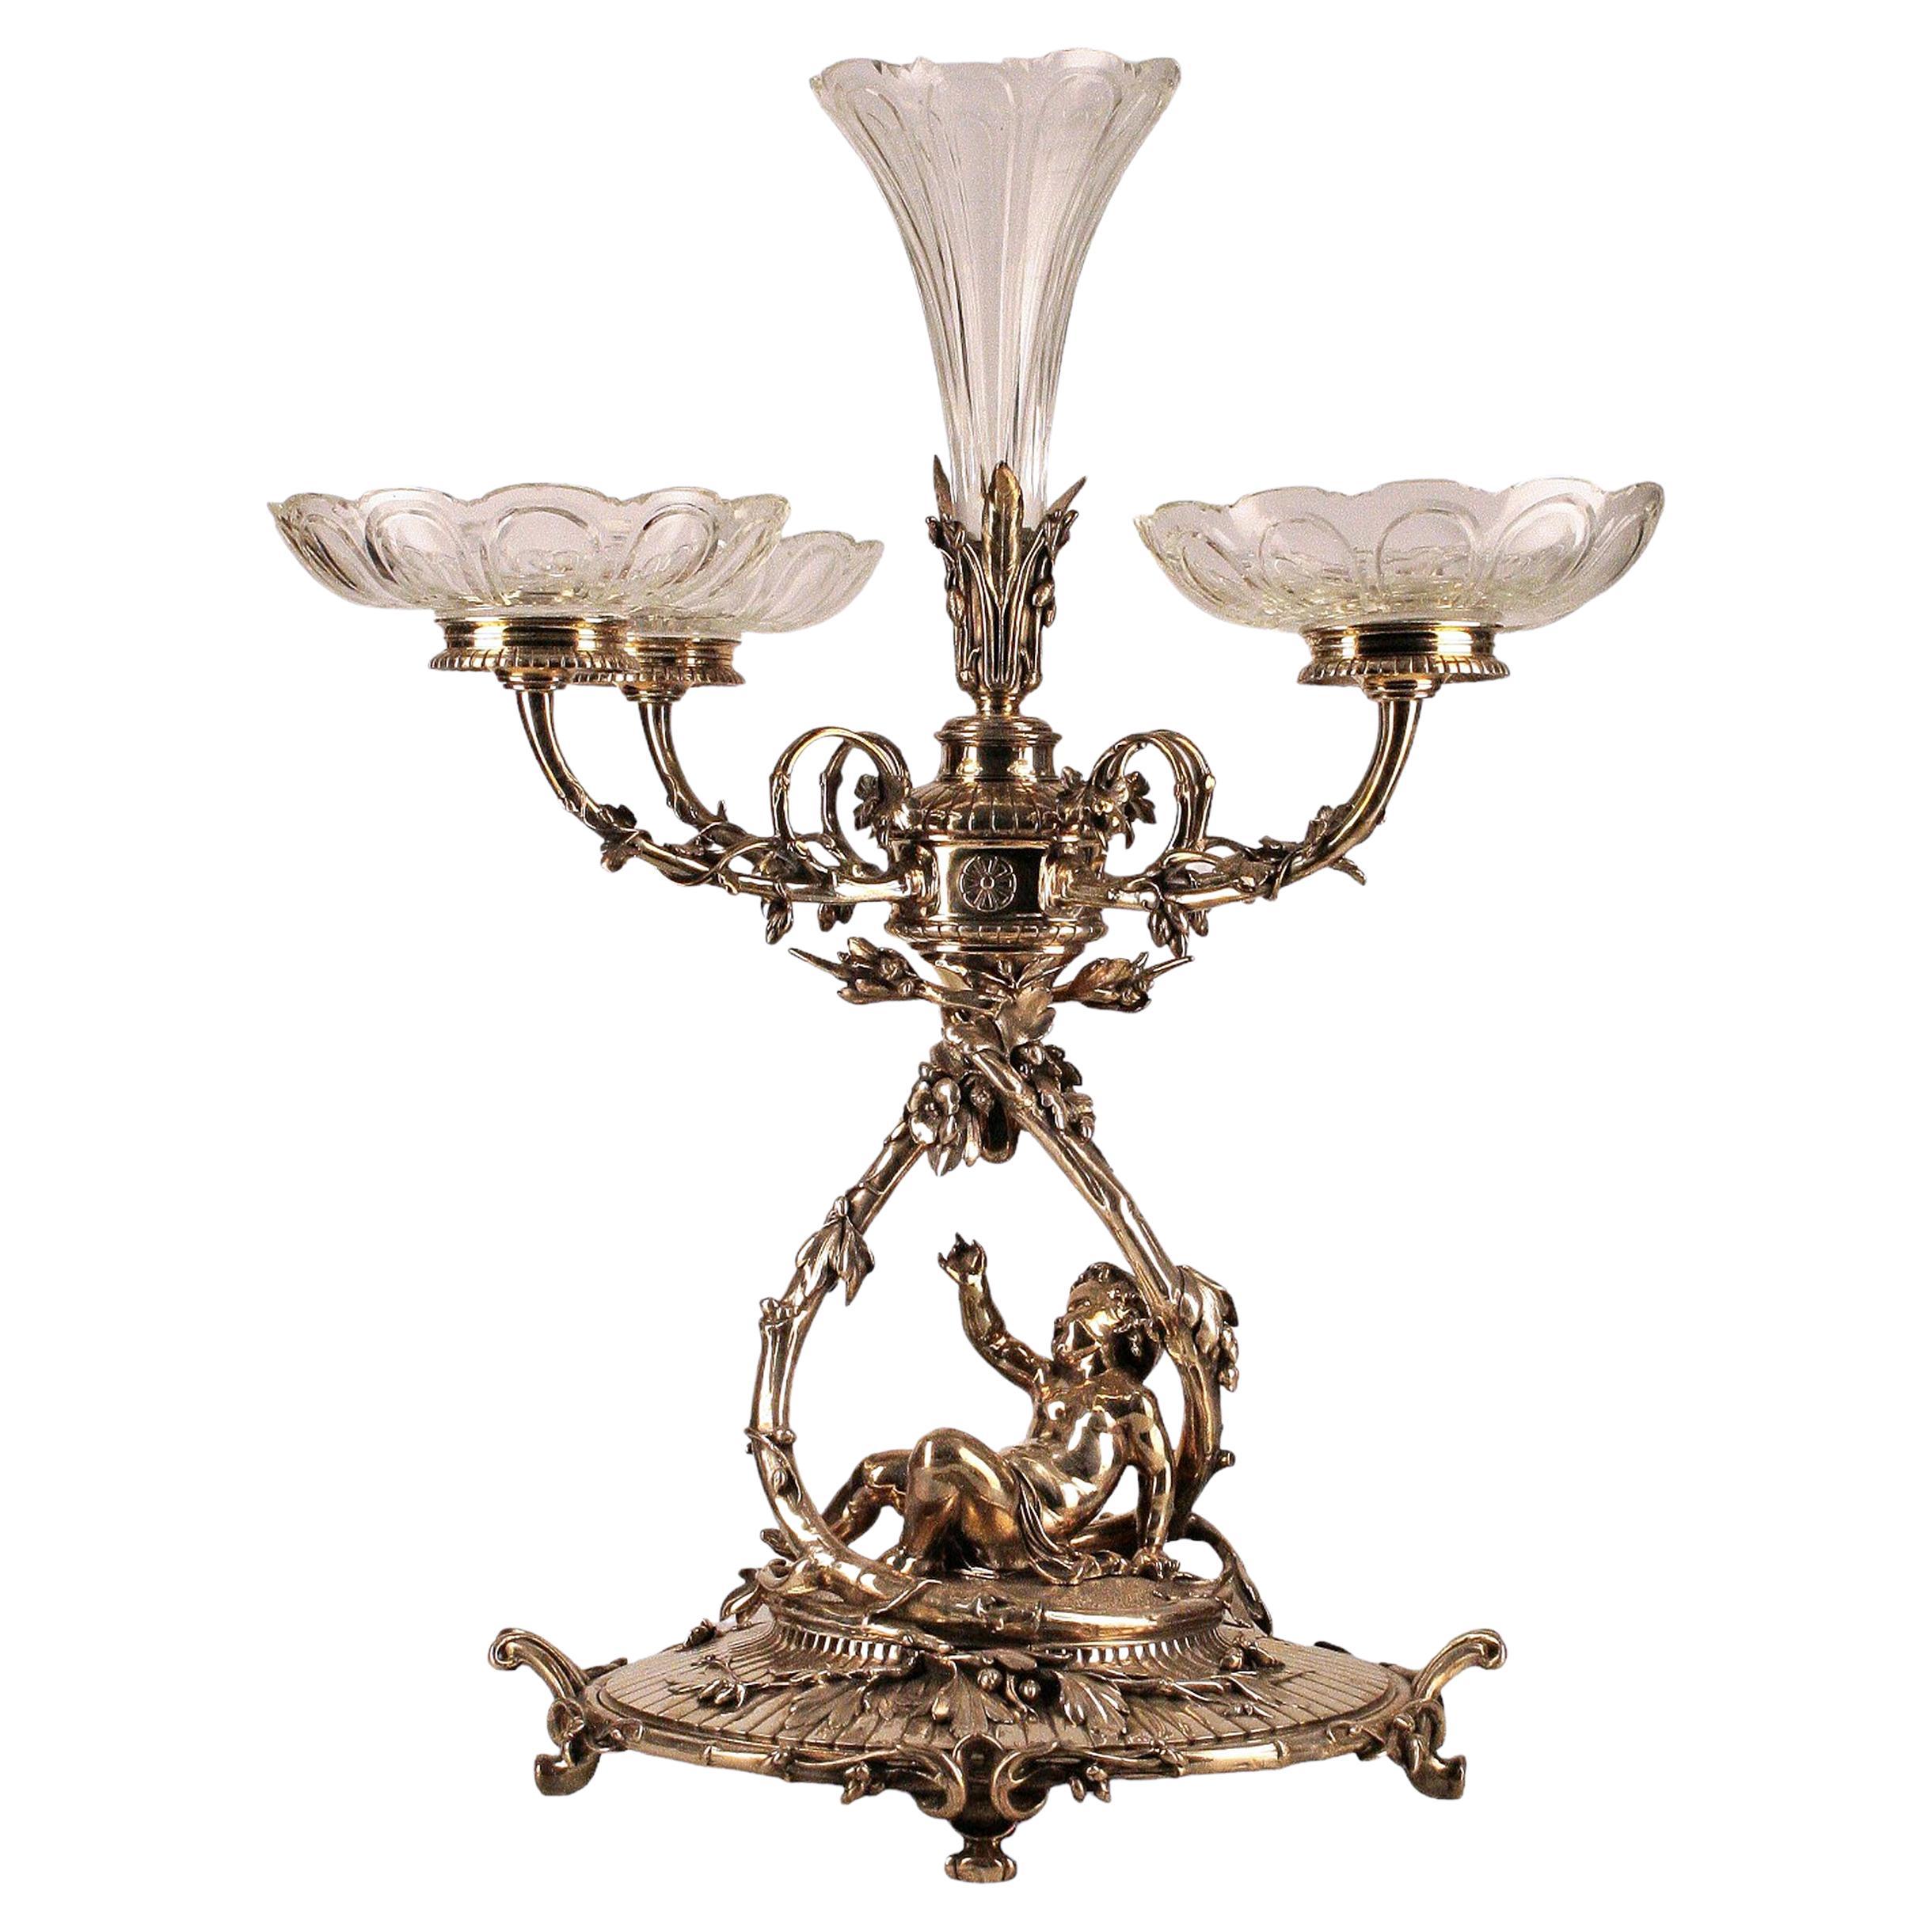 19th Century Christofle Silvered Epergne Centerpiece with Baccarat Glass, France